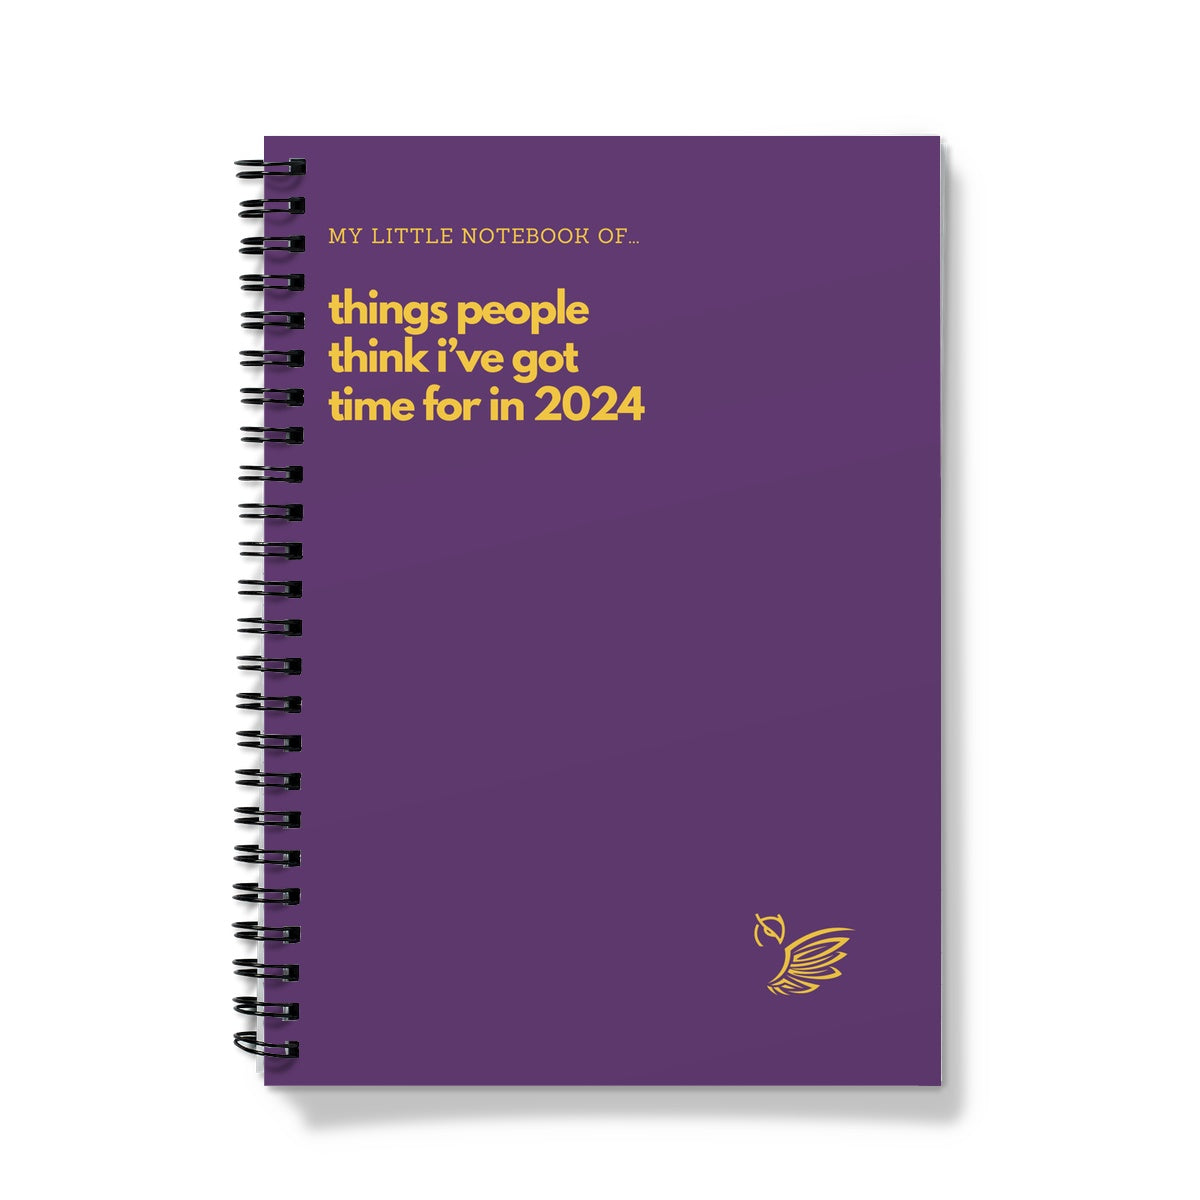 Things People Think I've Got Time For in 2024 Notebook